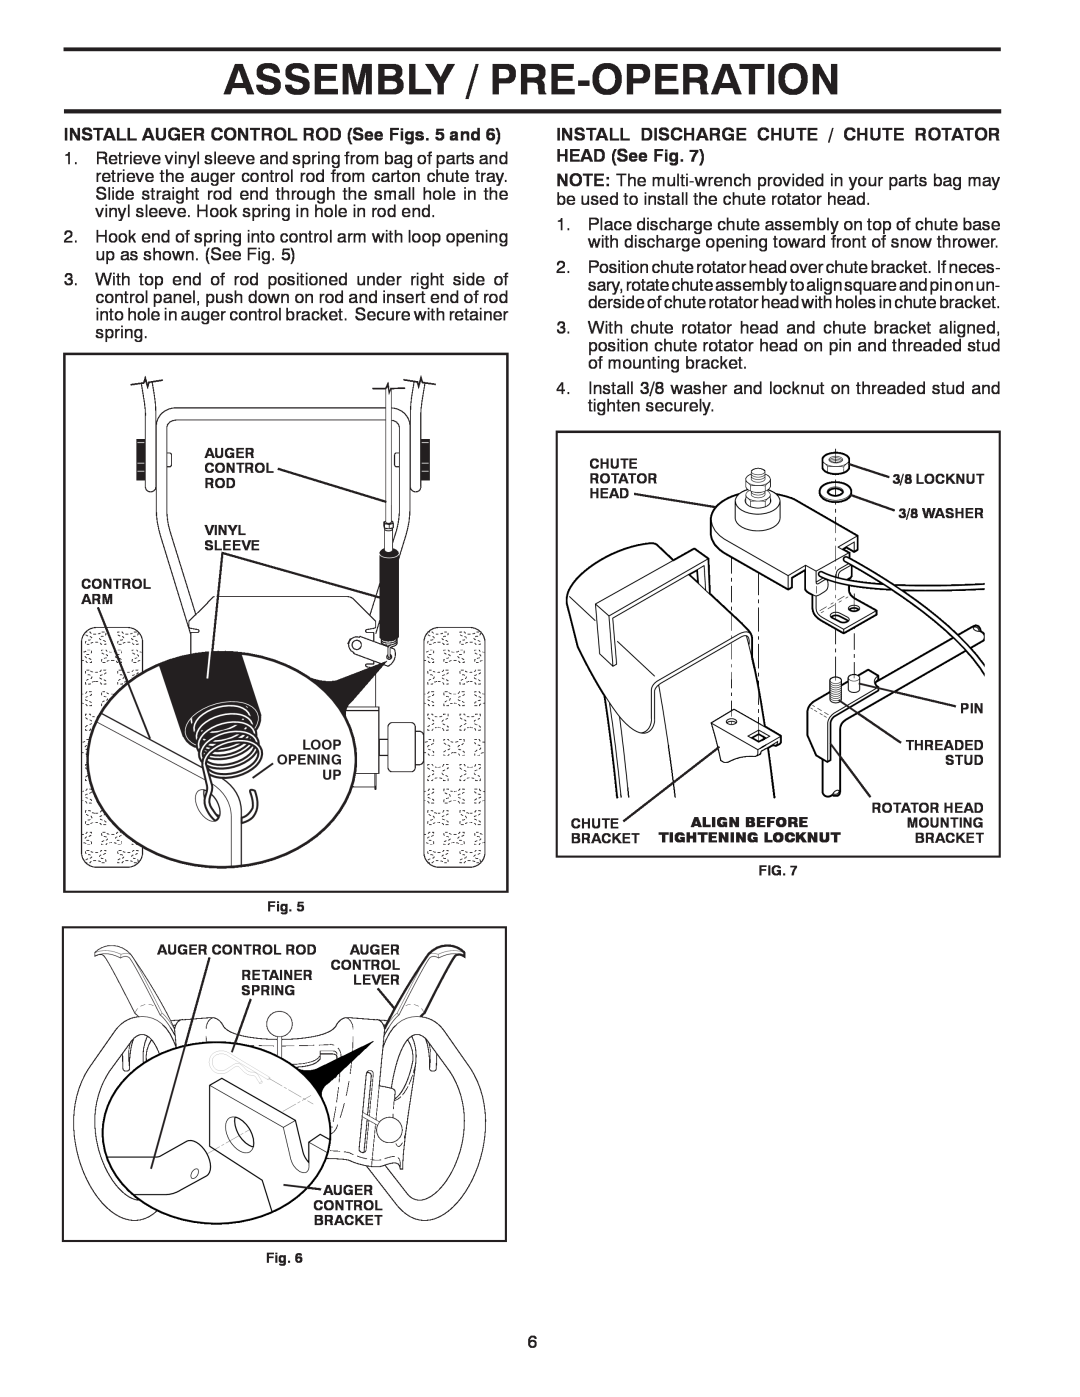 Poulan 435564, 96198003600, PP291E27 owner manual Assembly / Pre-Operation, INSTALL AUGER CONTROL ROD See Figs. 5 and 